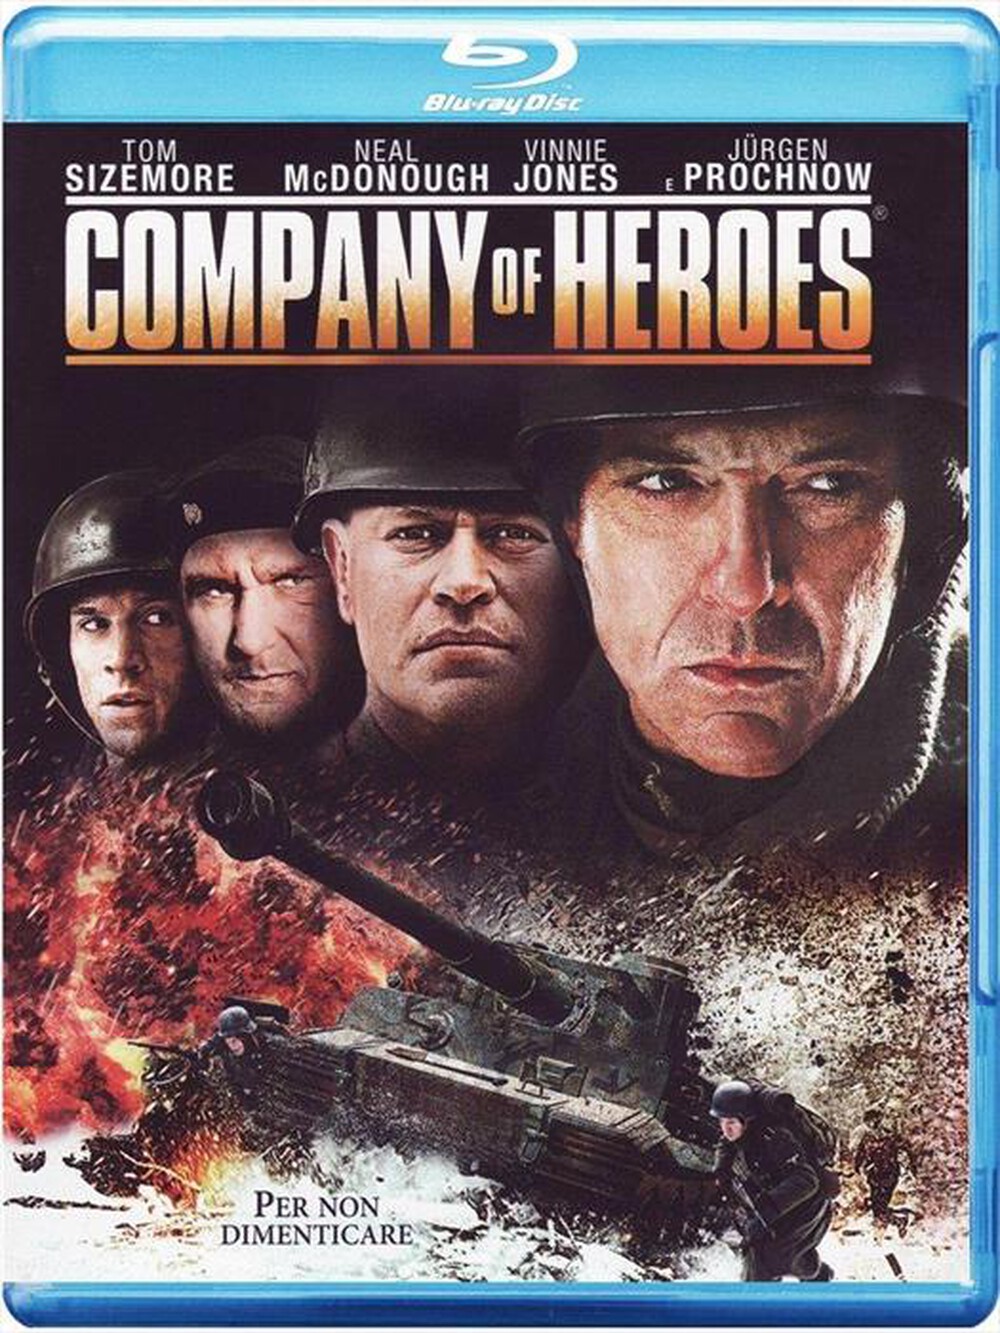 "SONY PICTURES - Company Of Heroes"